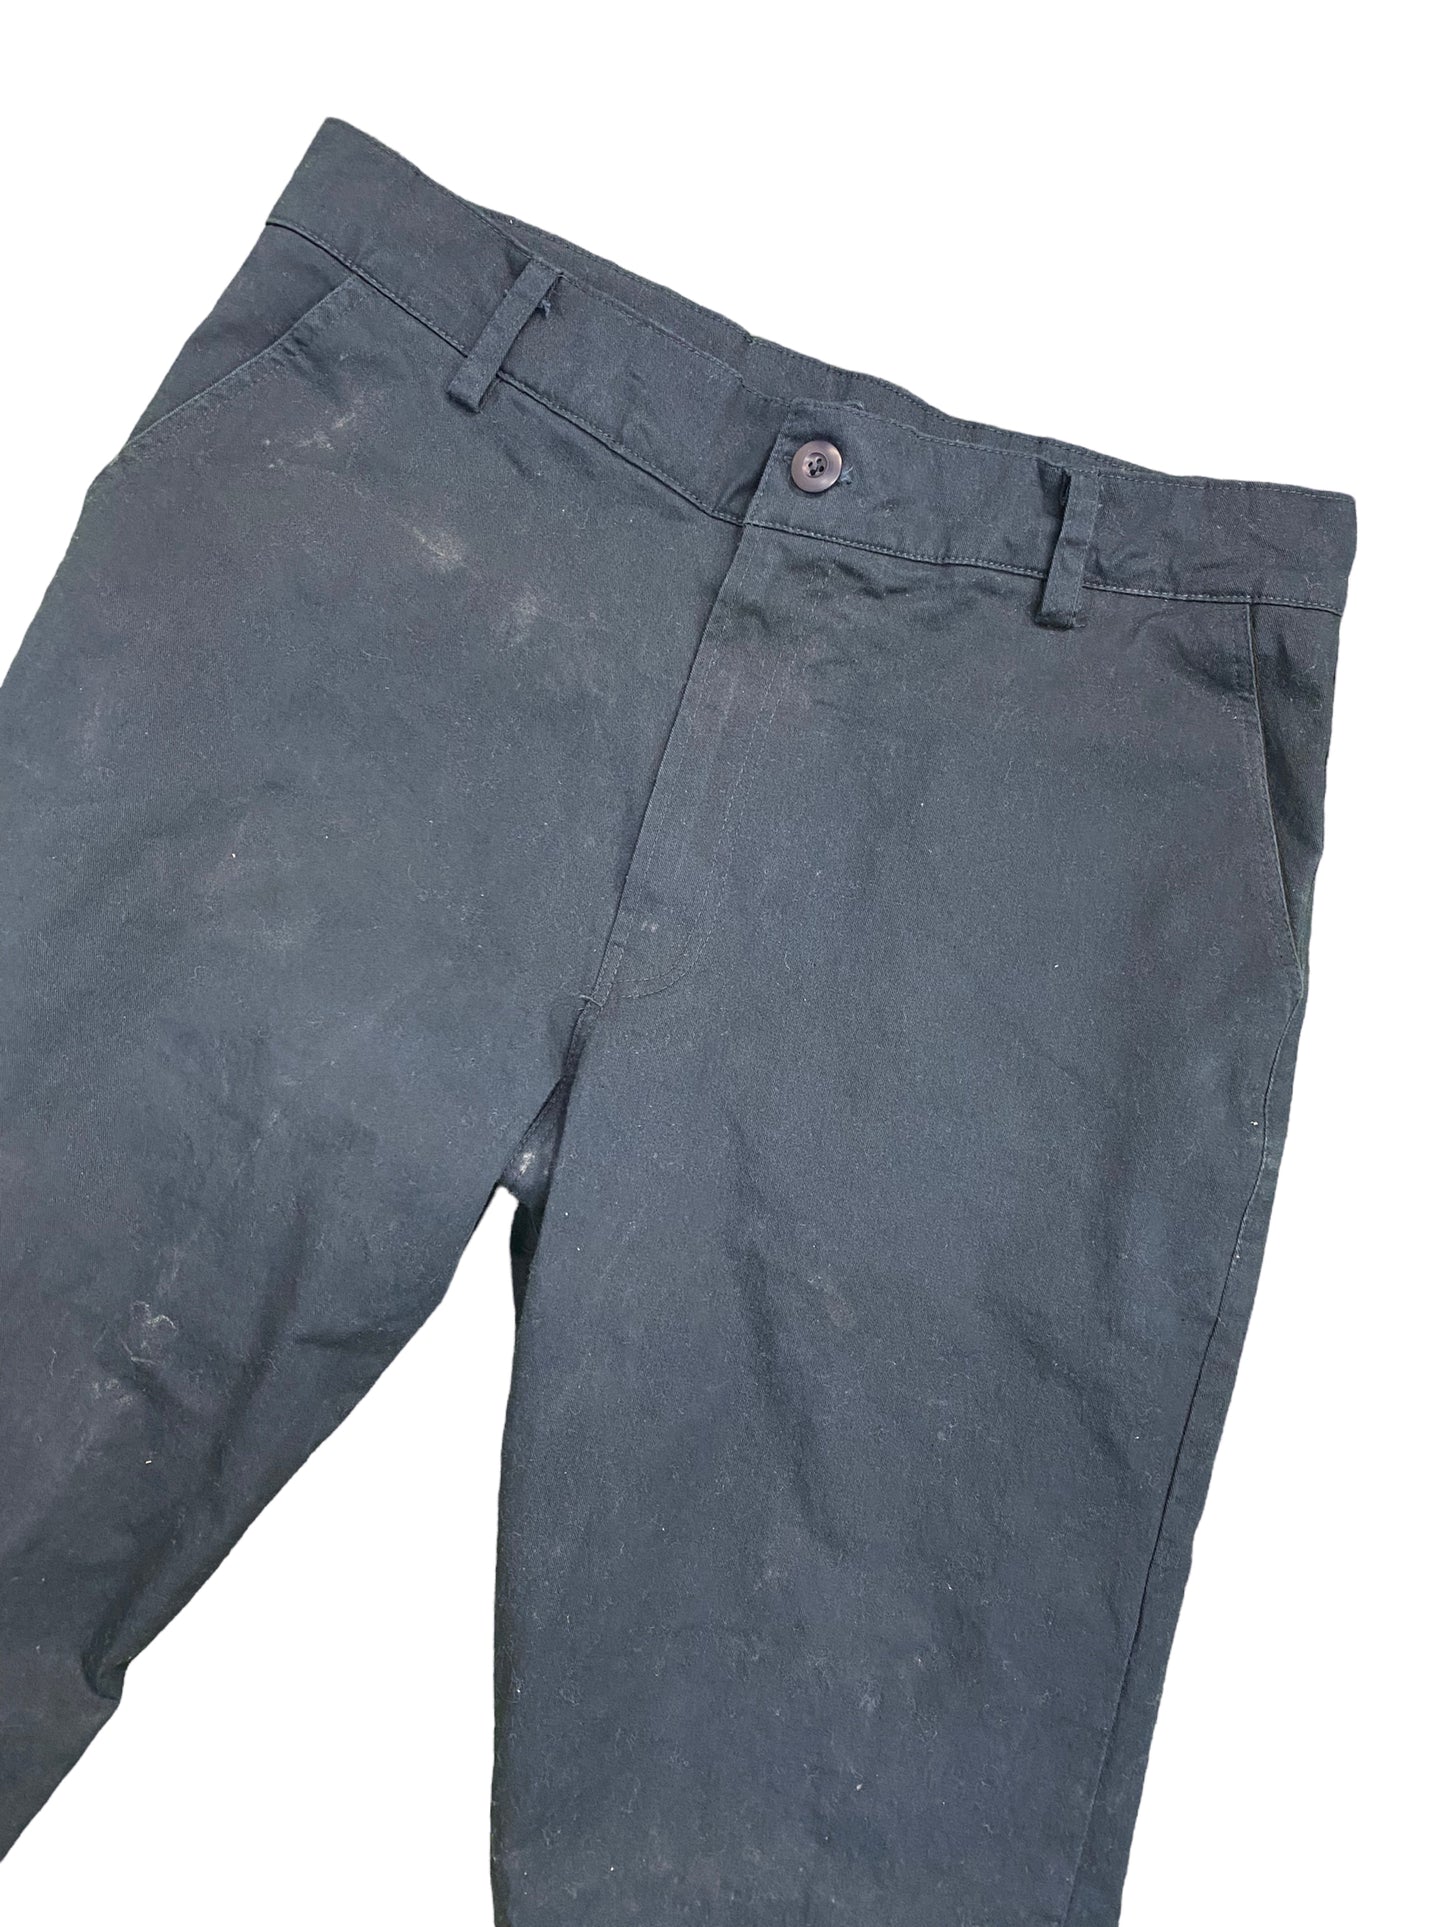 Preowned Youths in Balaclava Pants Sz 35x30